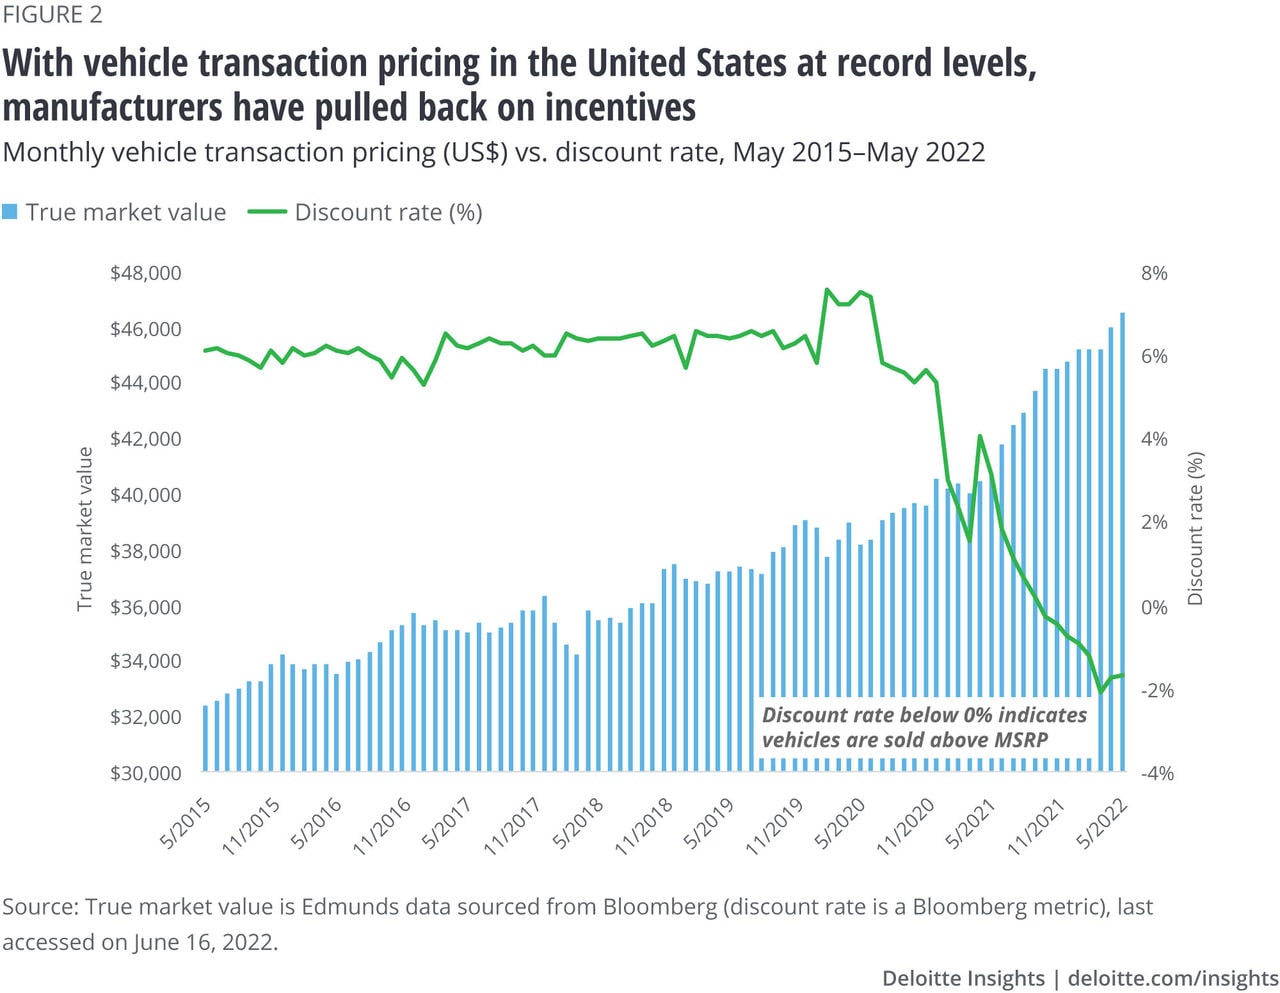 Figure 2: Vehicle transaction pricing (US$) vs. discount rate, monthly, May 2015- May 2022